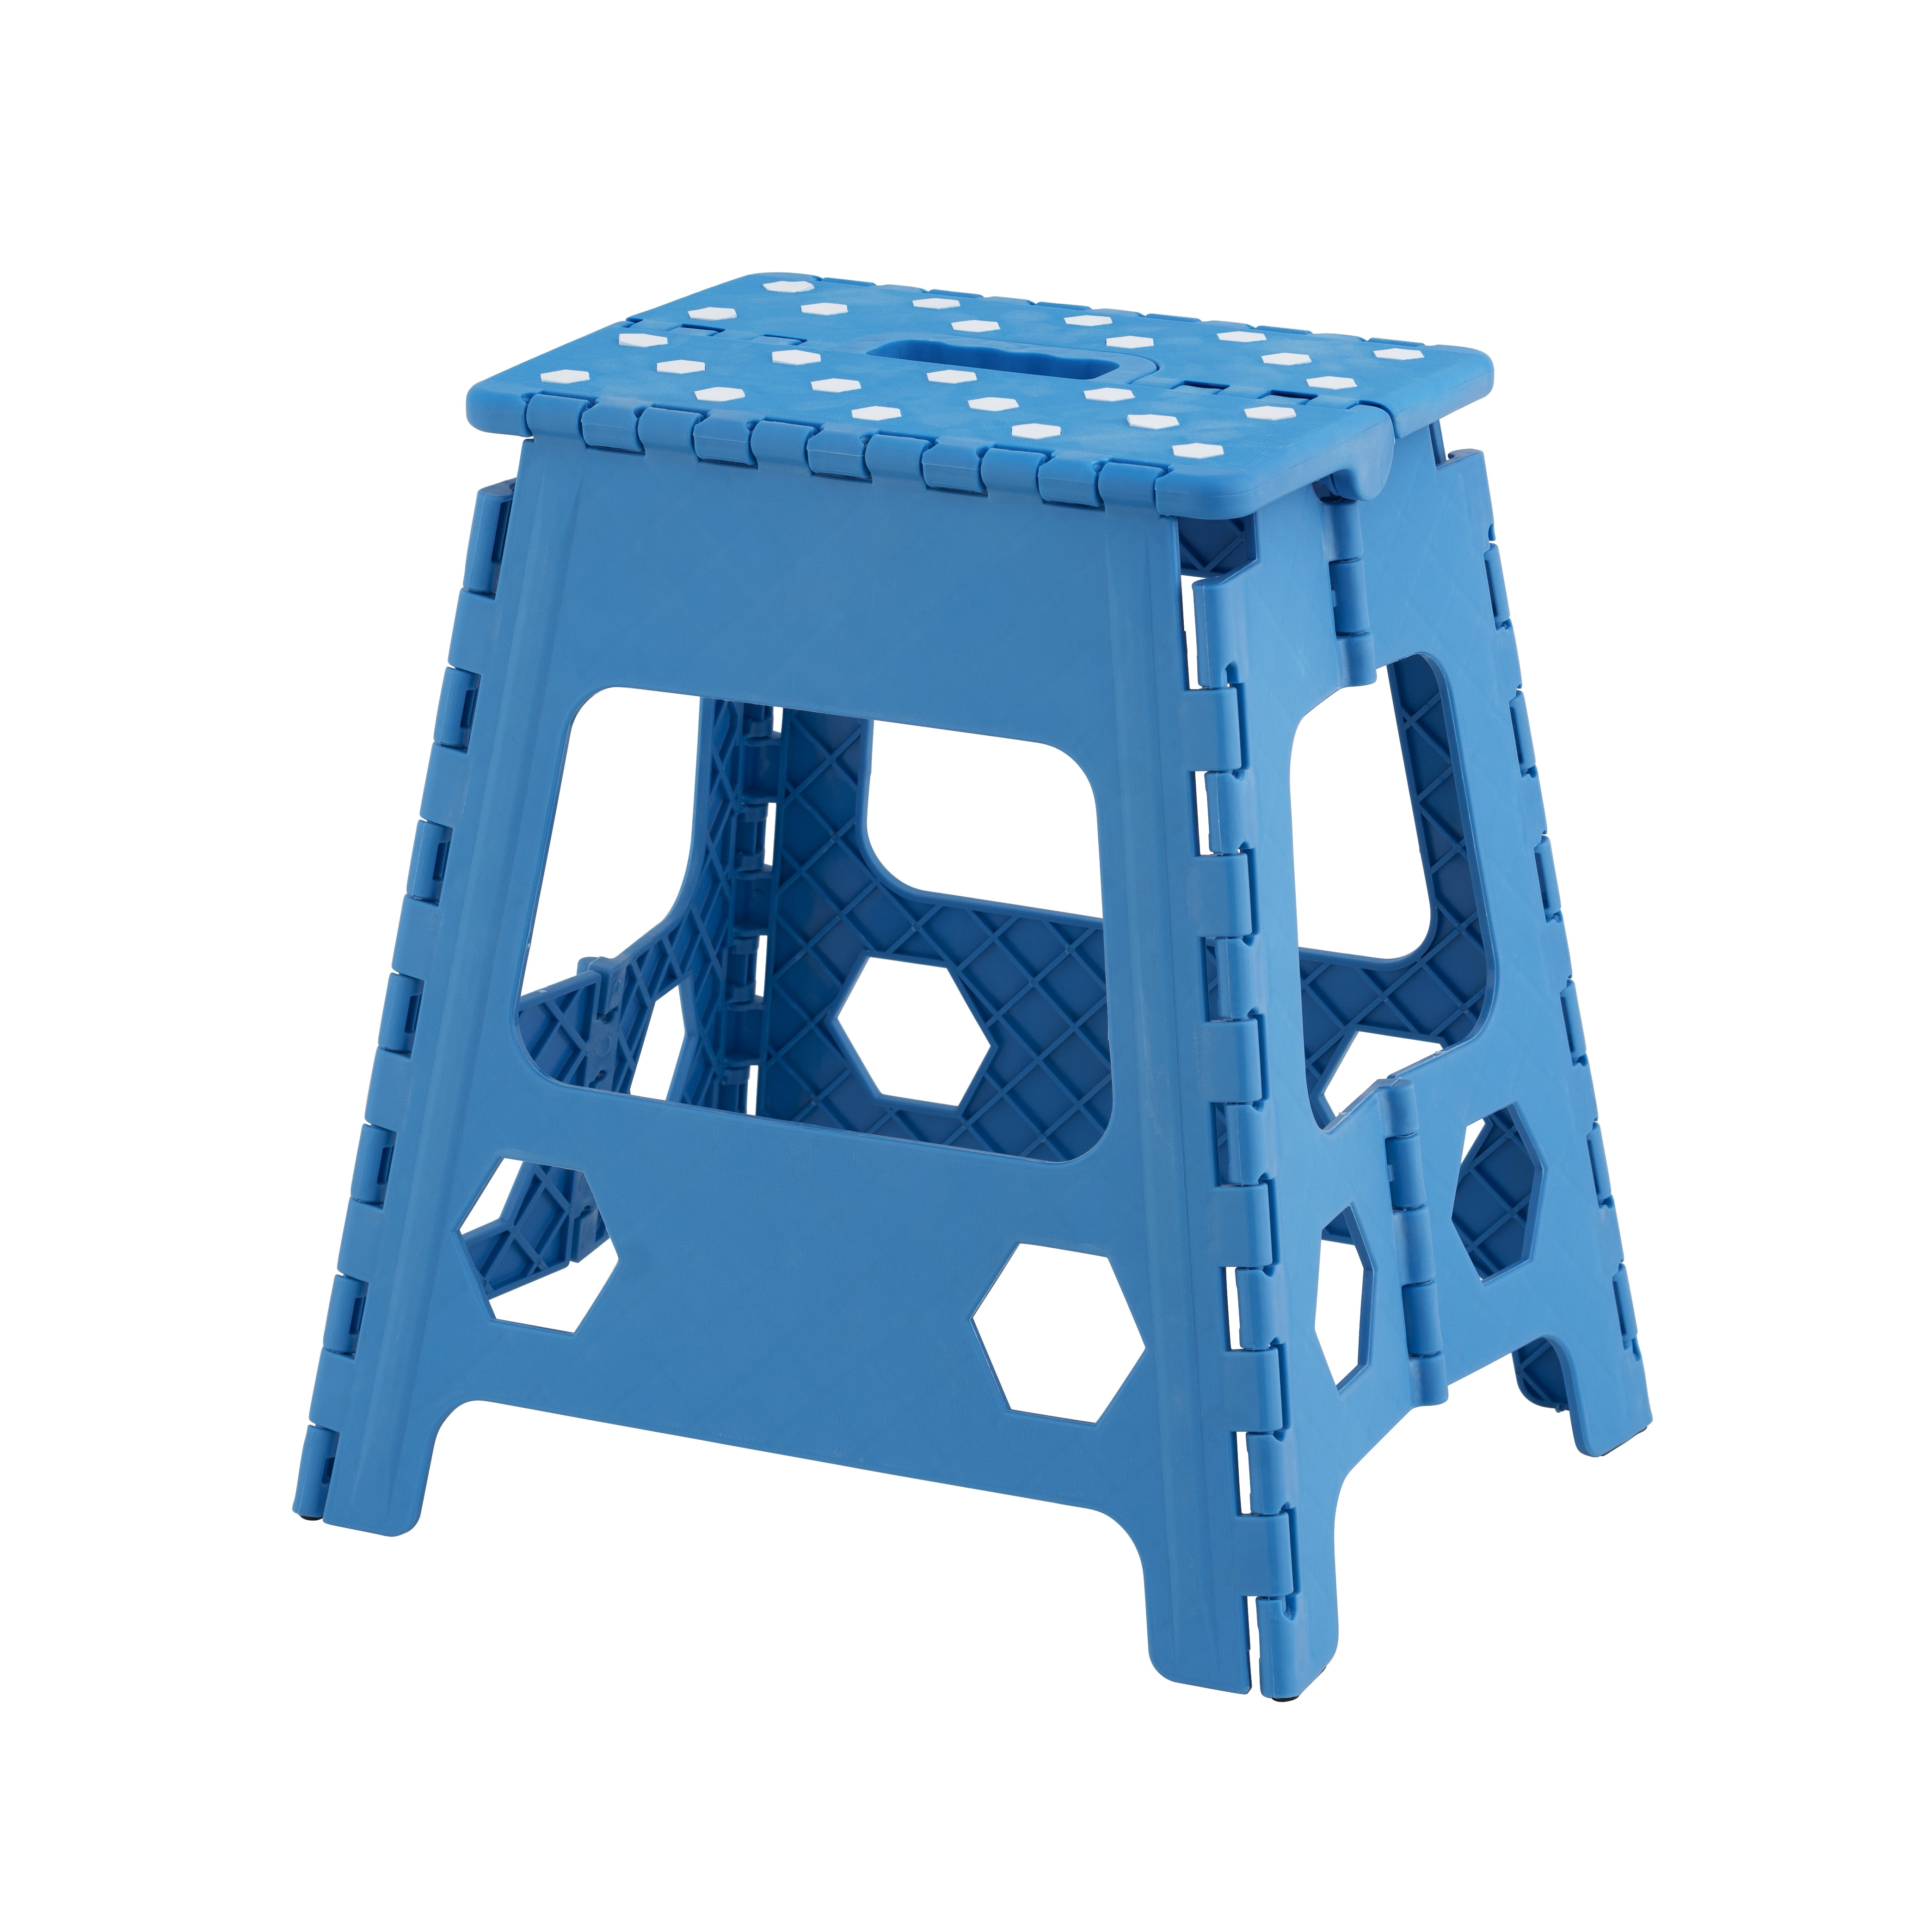 Portable Lightweight Step Stool Plastic Non-Slip Foot Stool for Kids and Adults Opens Easy with One Flip. Whotman Folding Step Stool Foldable Kitchen Step Stool Ideal for Kitchen Bathroom